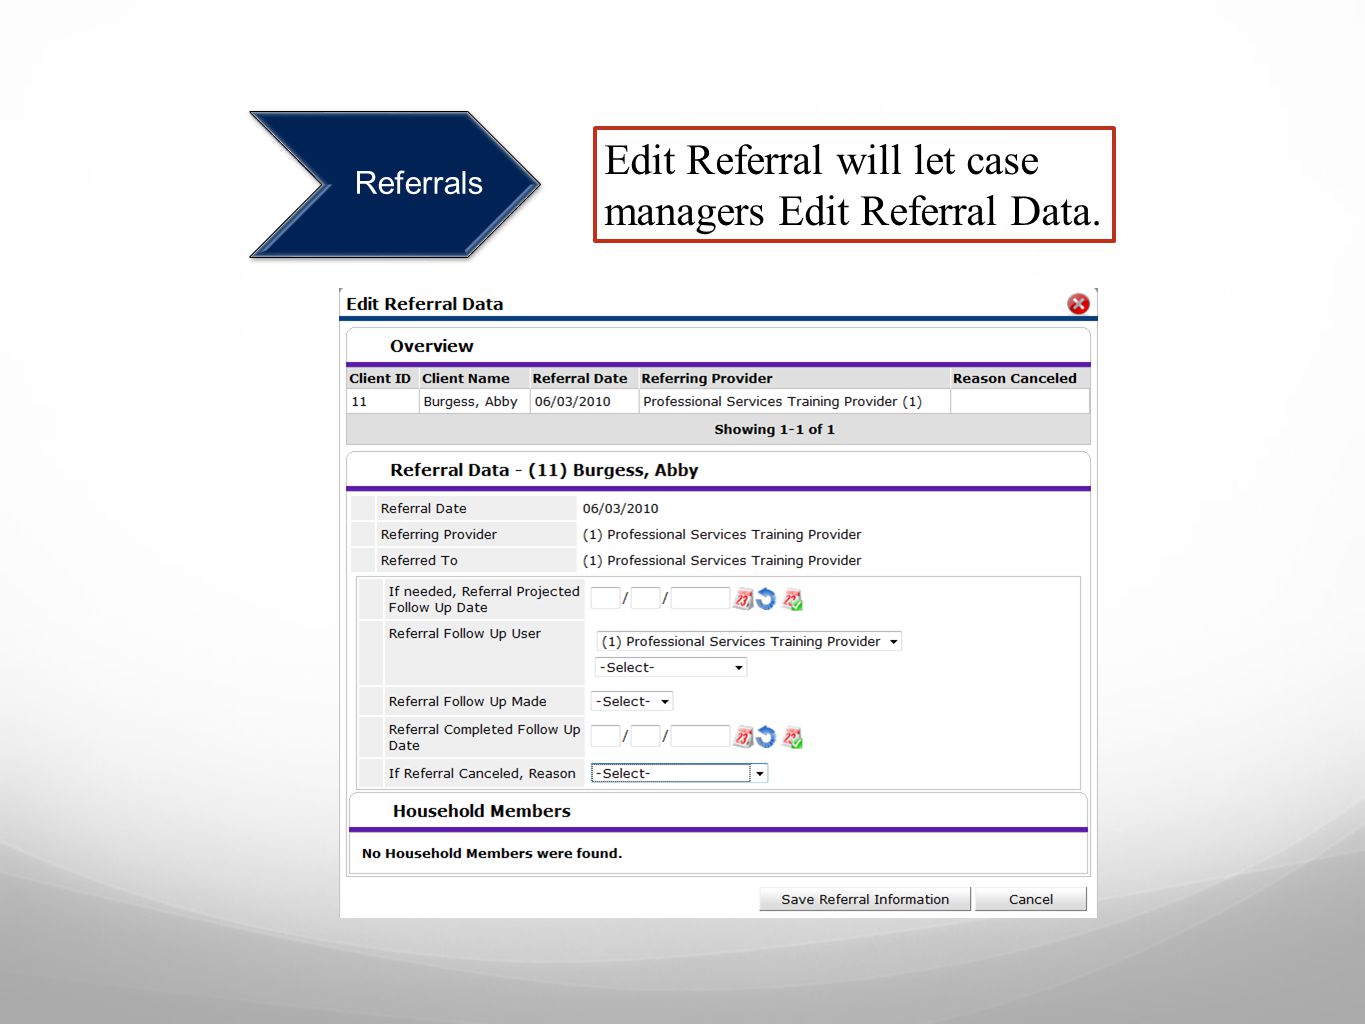 Referrals Edit Referral will let case managers Edit Referral Data.